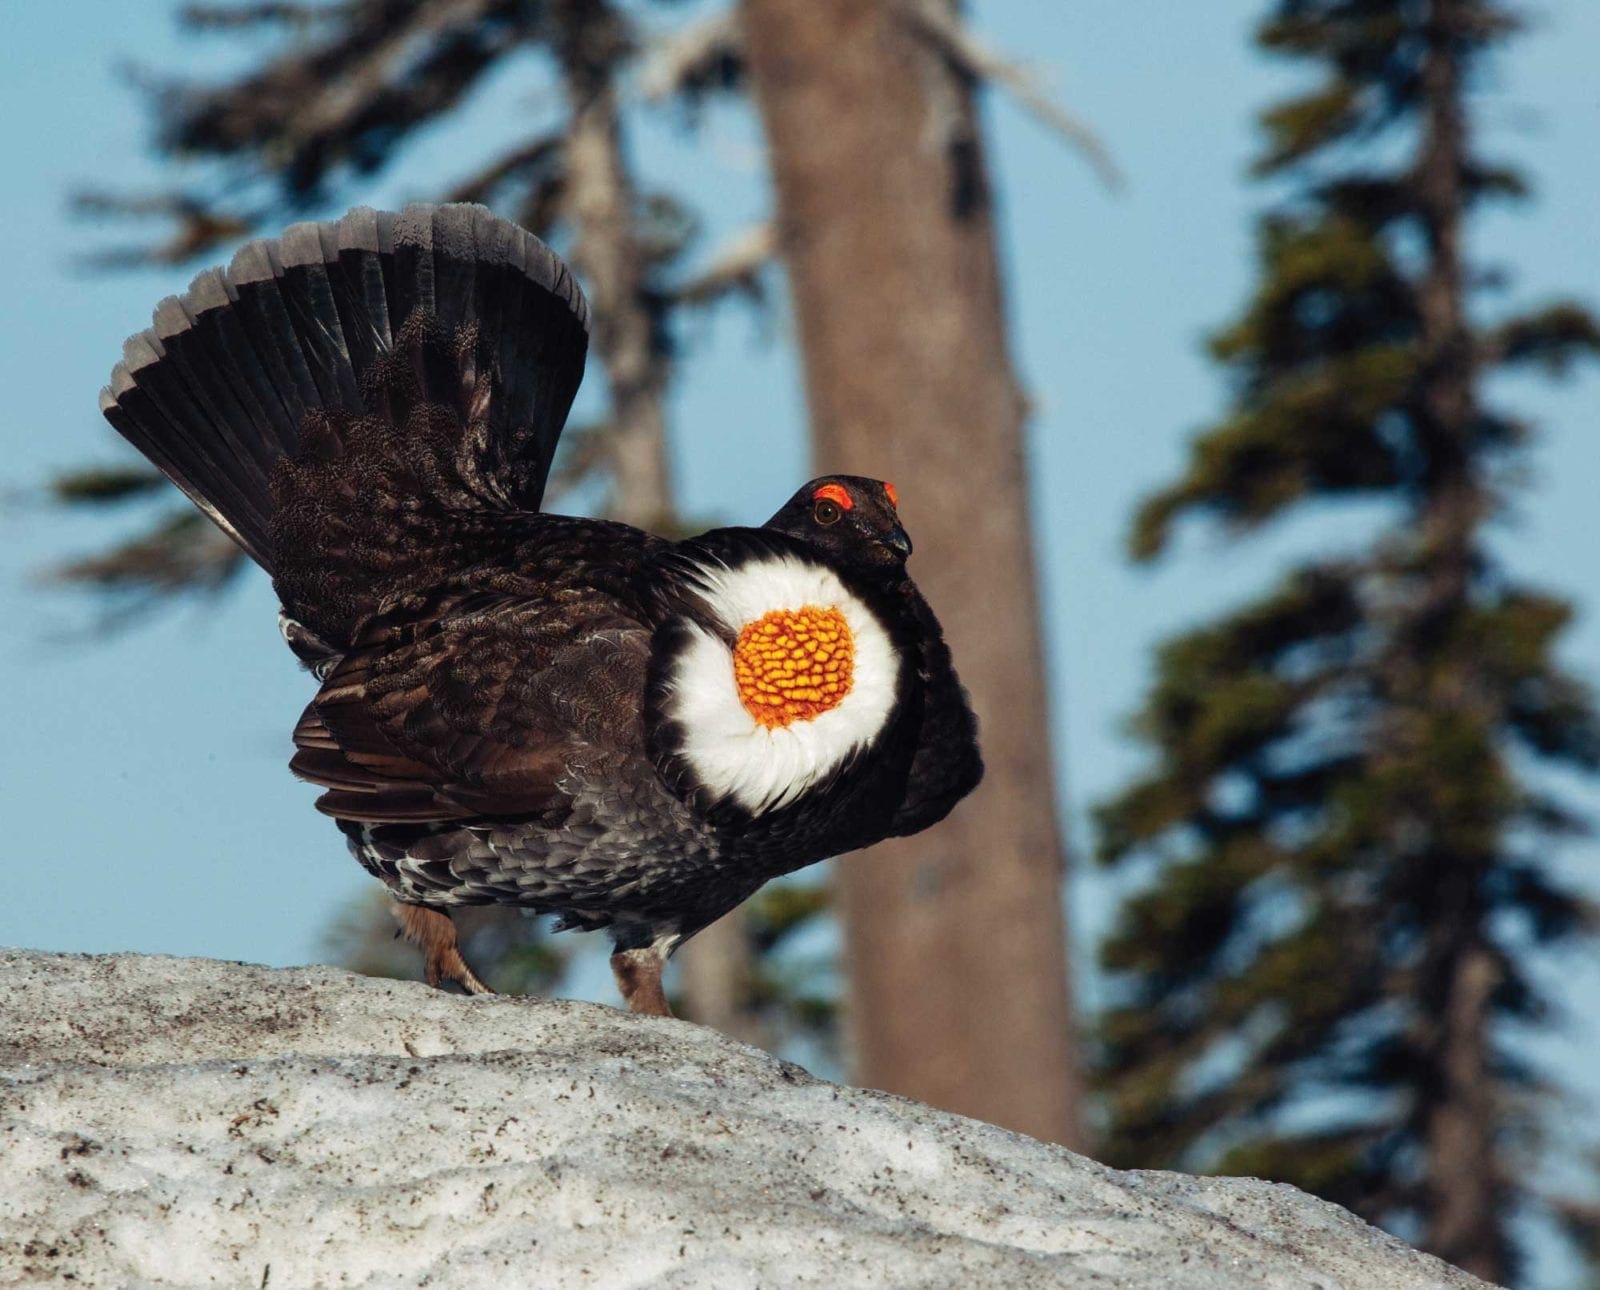 A male sooty grouse displaying feathers.